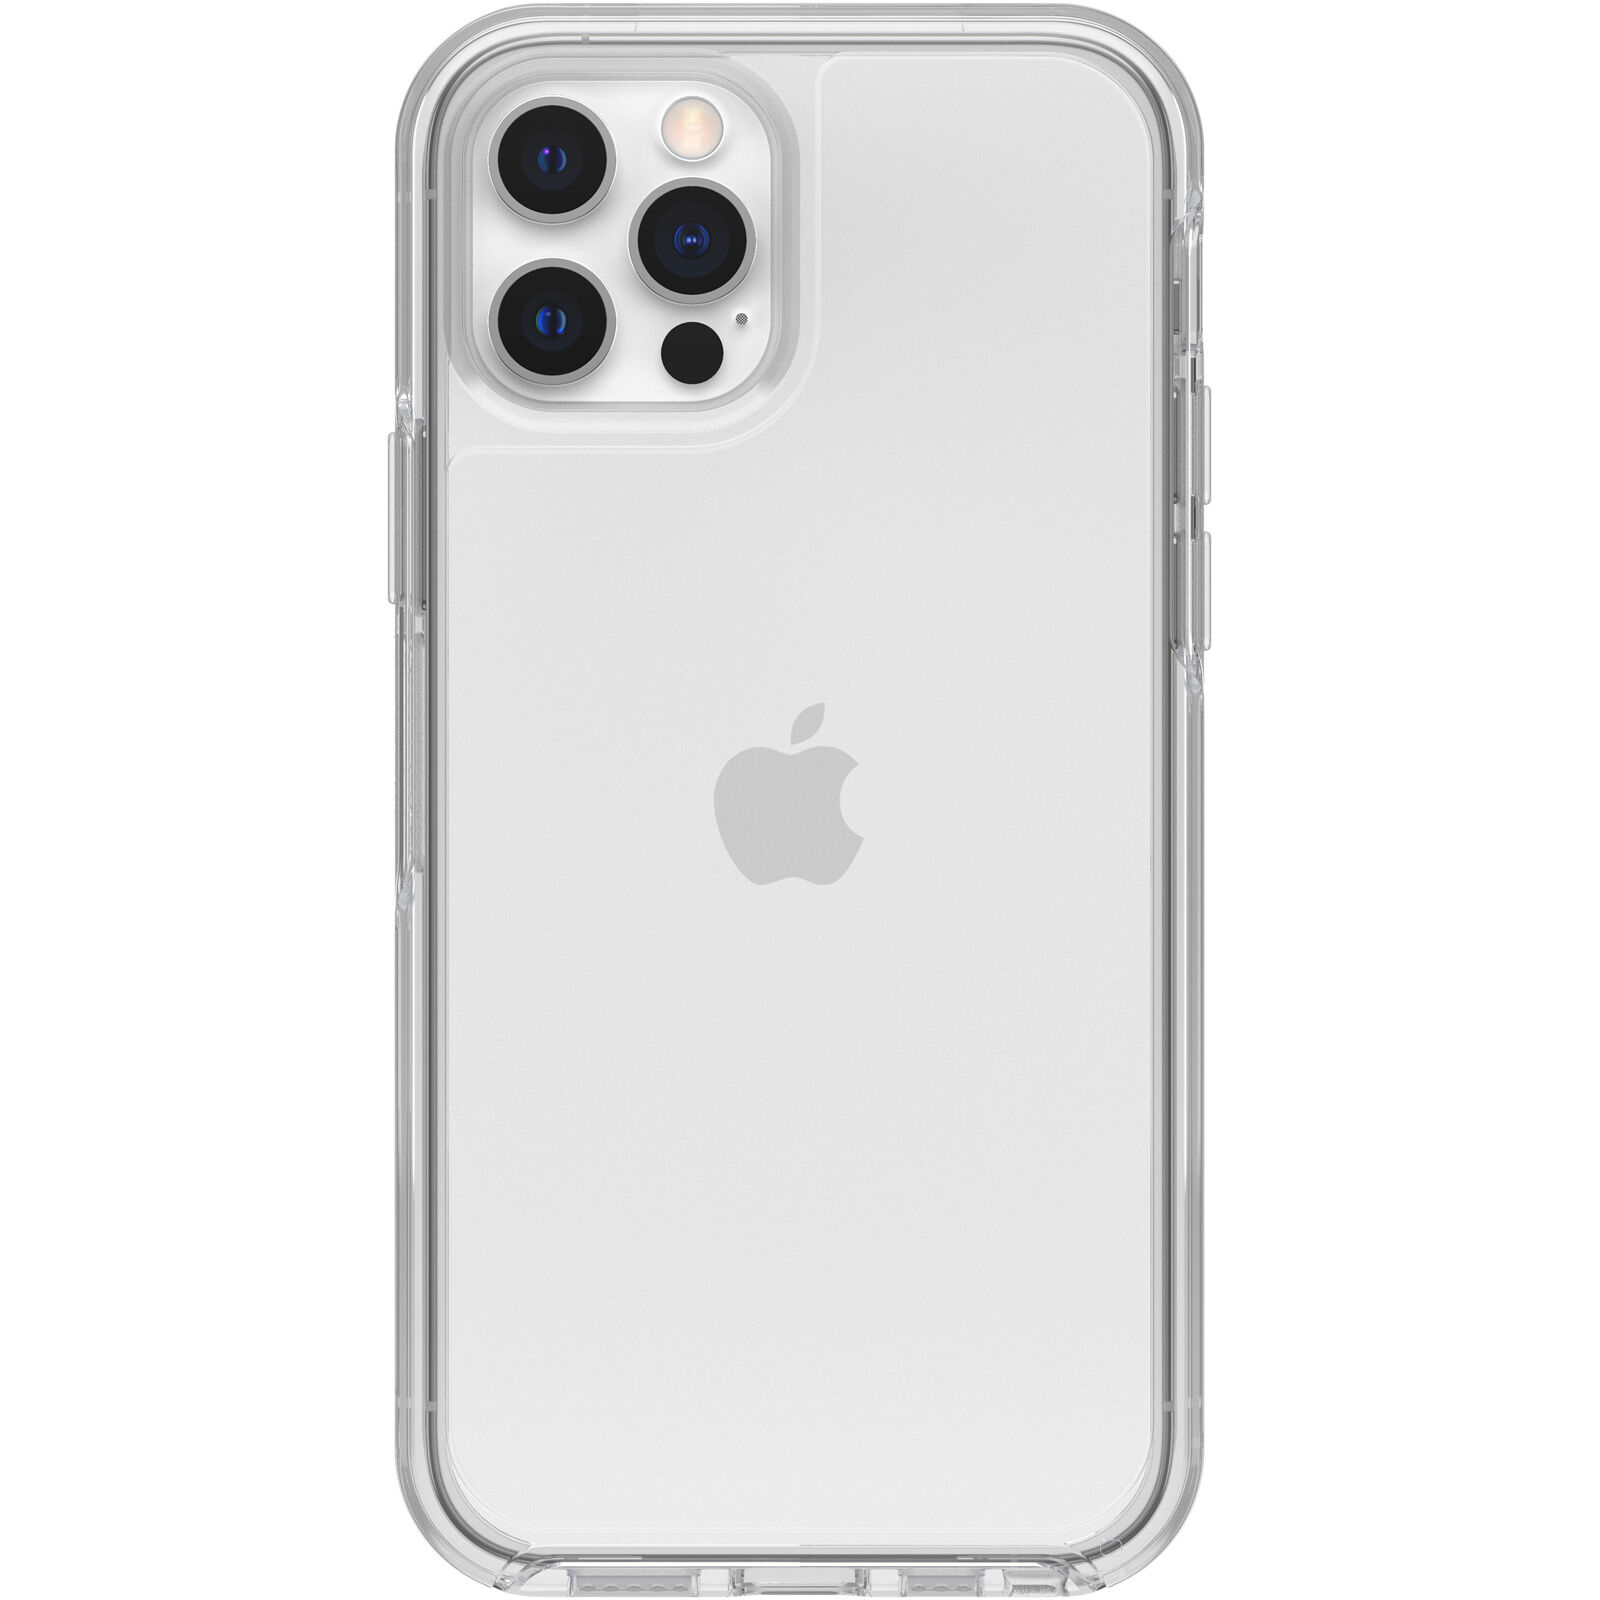 iPhone 12 Cases & Covers from OtterBox